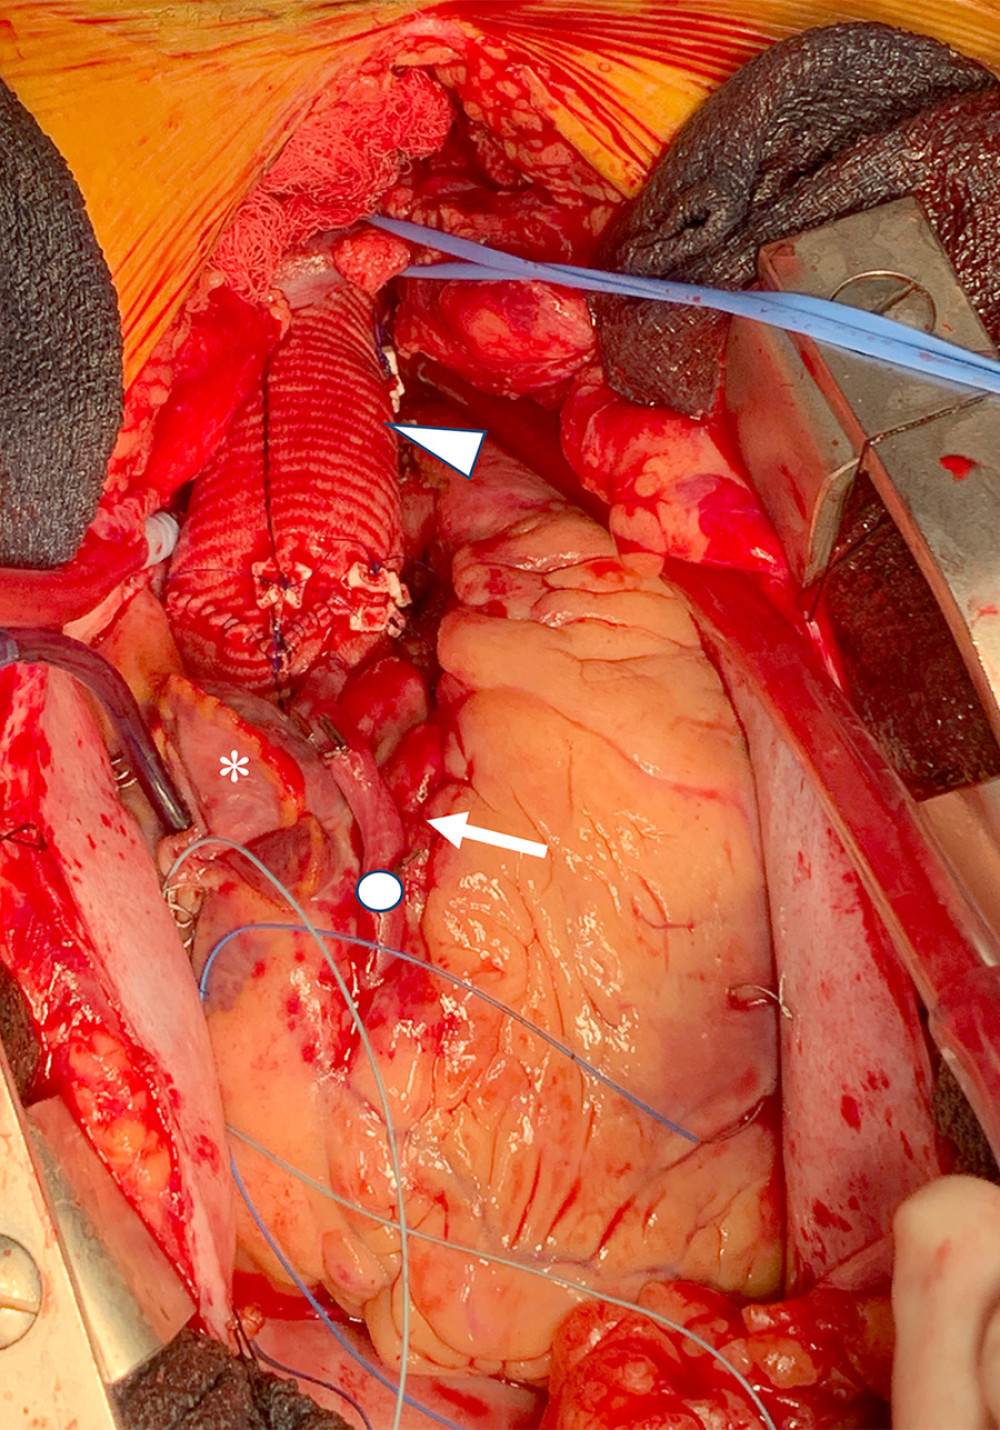 Post-bypass gross photograph of the heart and ascending aorta. The aortic root was reconstructed using a valve-sparing technique. The right atrium (star) was used for central venous cannulation and later secured with a blue tourniquet. The arterial cannula has been removed and hemostasis achieved using a pledgeted purse string suture on the lateral side of the aortic graft (triangle). The right coronary artery demonstrates periarterial hematoma (arrow) from the proximal dissection, which was bypassed with a vein graft (circle). A blue vessel loop is retracting the innominate vein to better expose the innominate artery, which was reimplanted.